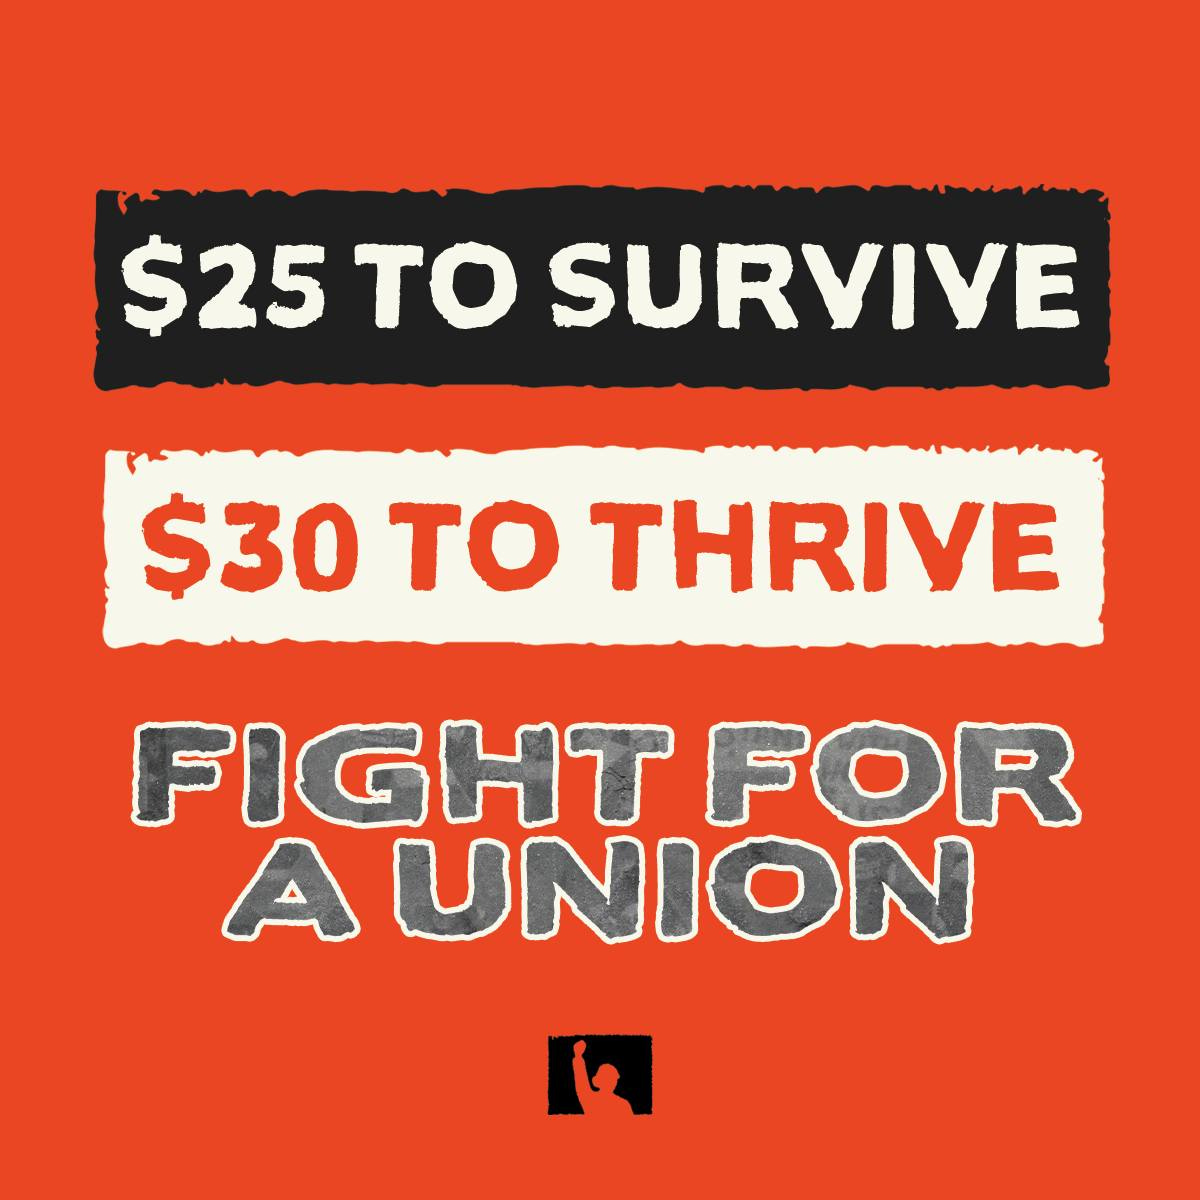 graphic reading: 
$25 TO SURVIVE 
$30 TO THRIVE 
FIGHT FOR A UNION